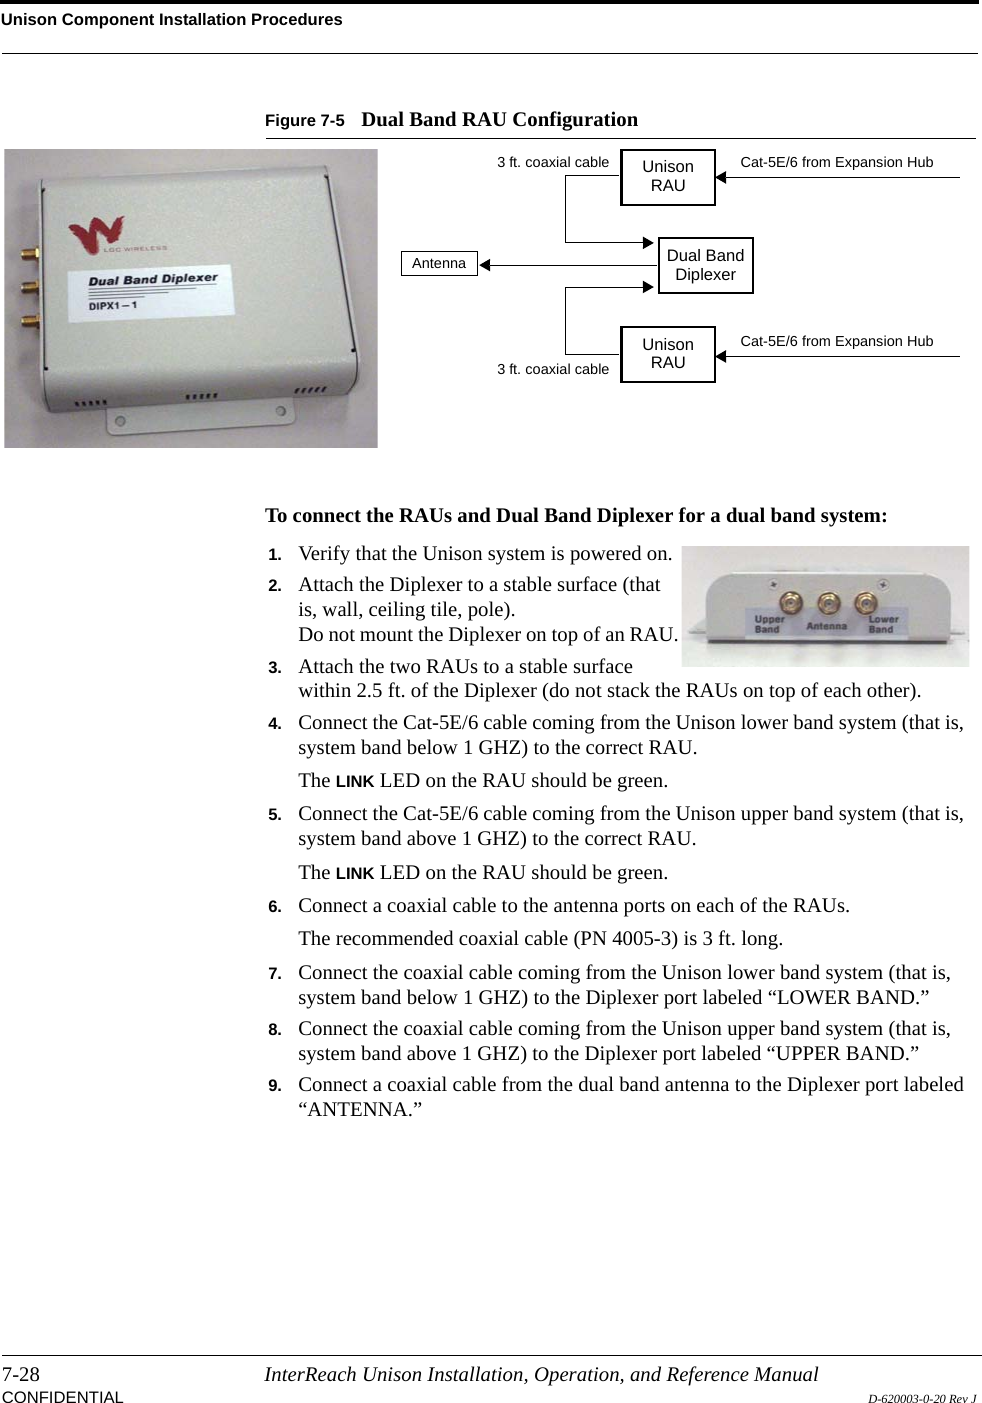 Unison Component Installation Procedures7-28 InterReach Unison Installation, Operation, and Reference ManualCONFIDENTIAL D-620003-0-20 Rev JFigure 7-5 Dual Band RAU ConfigurationTo connect the RAUs and Dual Band Diplexer for a dual band system:UnisonRAUUnisonRAUDual BandDiplexerCat-5E/6 from Expansion HubCat-5E/6 from Expansion HubAntenna3 ft. coaxial cable3 ft. coaxial cableDual Band Diplexer1. Verify that the Unison system is powered on.2. Attach the Diplexer to a stable surface (that is, wall, ceiling tile, pole).Do not mount the Diplexer on top of an RAU.3. Attach the two RAUs to a stable surface within 2.5 ft. of the Diplexer (do not stack the RAUs on top of each other).4. Connect the Cat-5E/6 cable coming from the Unison lower band system (that is, system band below 1 GHZ) to the correct RAU.The LINK LED on the RAU should be green.5. Connect the Cat-5E/6 cable coming from the Unison upper band system (that is, system band above 1 GHZ) to the correct RAU.The LINK LED on the RAU should be green.6. Connect a coaxial cable to the antenna ports on each of the RAUs.The recommended coaxial cable (PN 4005-3) is 3 ft. long.7. Connect the coaxial cable coming from the Unison lower band system (that is, system band below 1 GHZ) to the Diplexer port labeled “LOWER BAND.”8. Connect the coaxial cable coming from the Unison upper band system (that is, system band above 1 GHZ) to the Diplexer port labeled “UPPER BAND.”9. Connect a coaxial cable from the dual band antenna to the Diplexer port labeled “ANTENNA.”